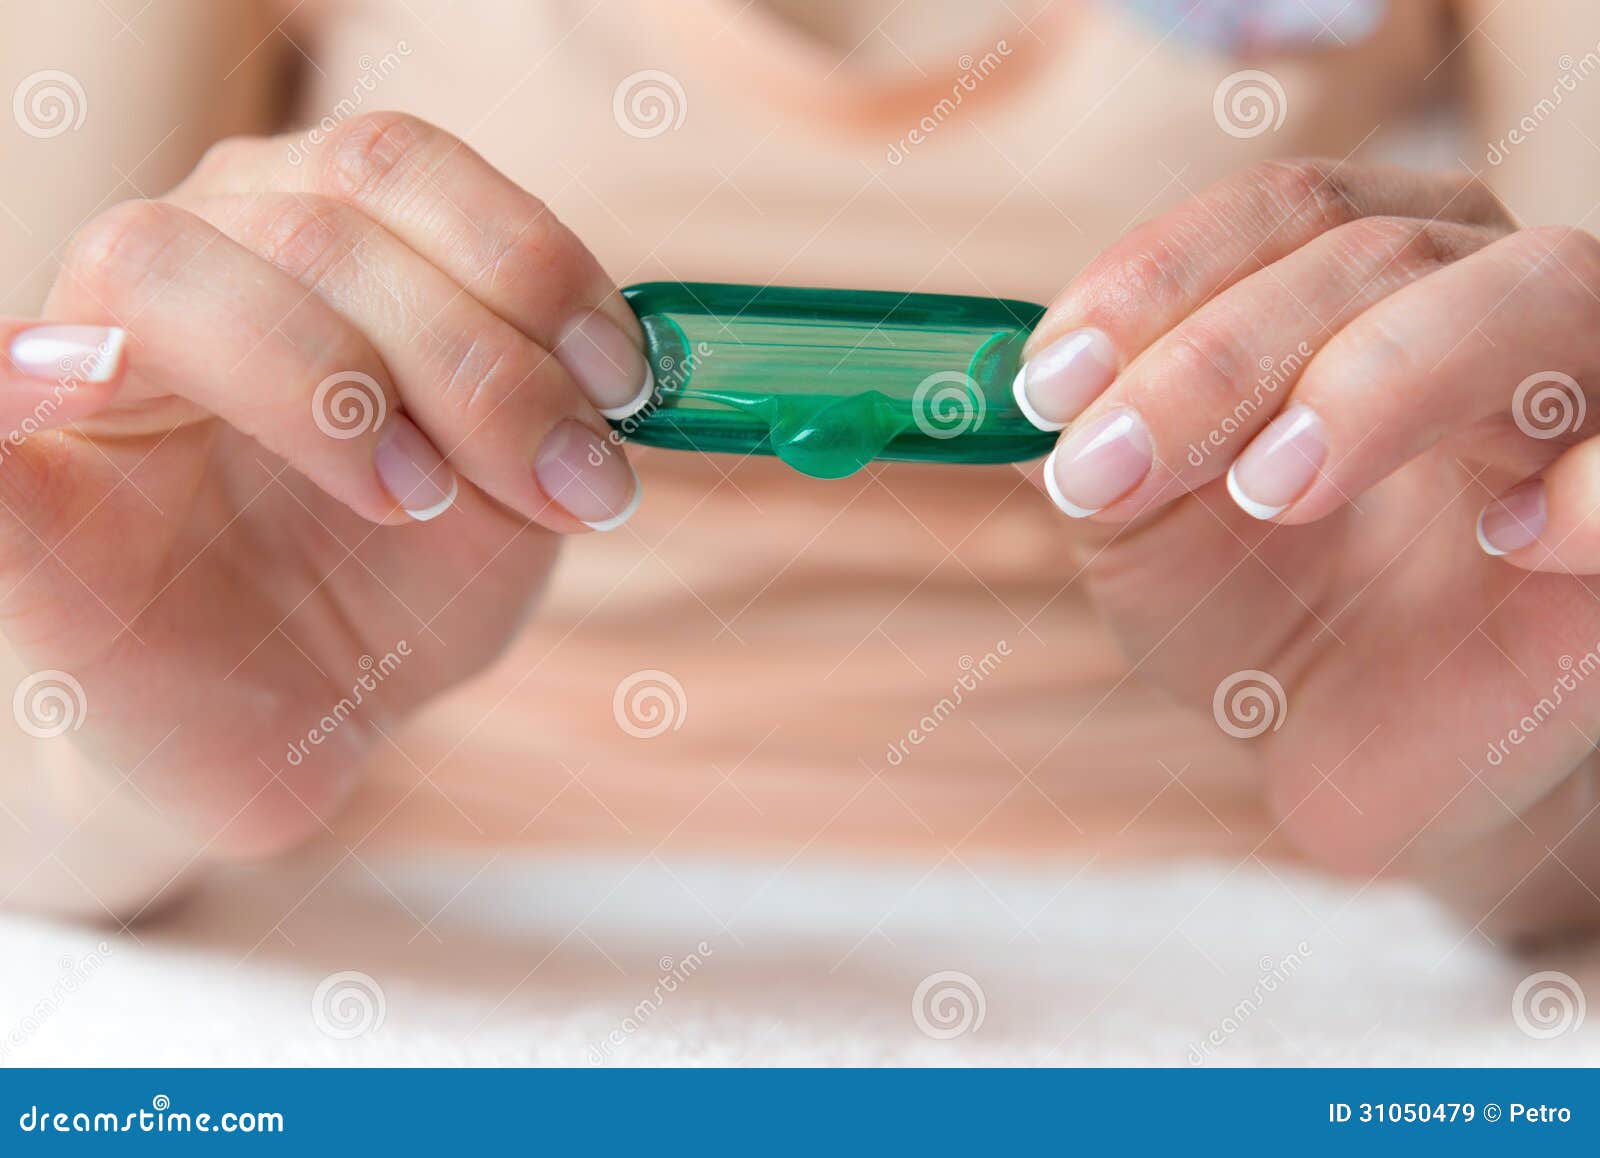 Woman Holding Condom In Hand Stock Image Image Of Condom Education